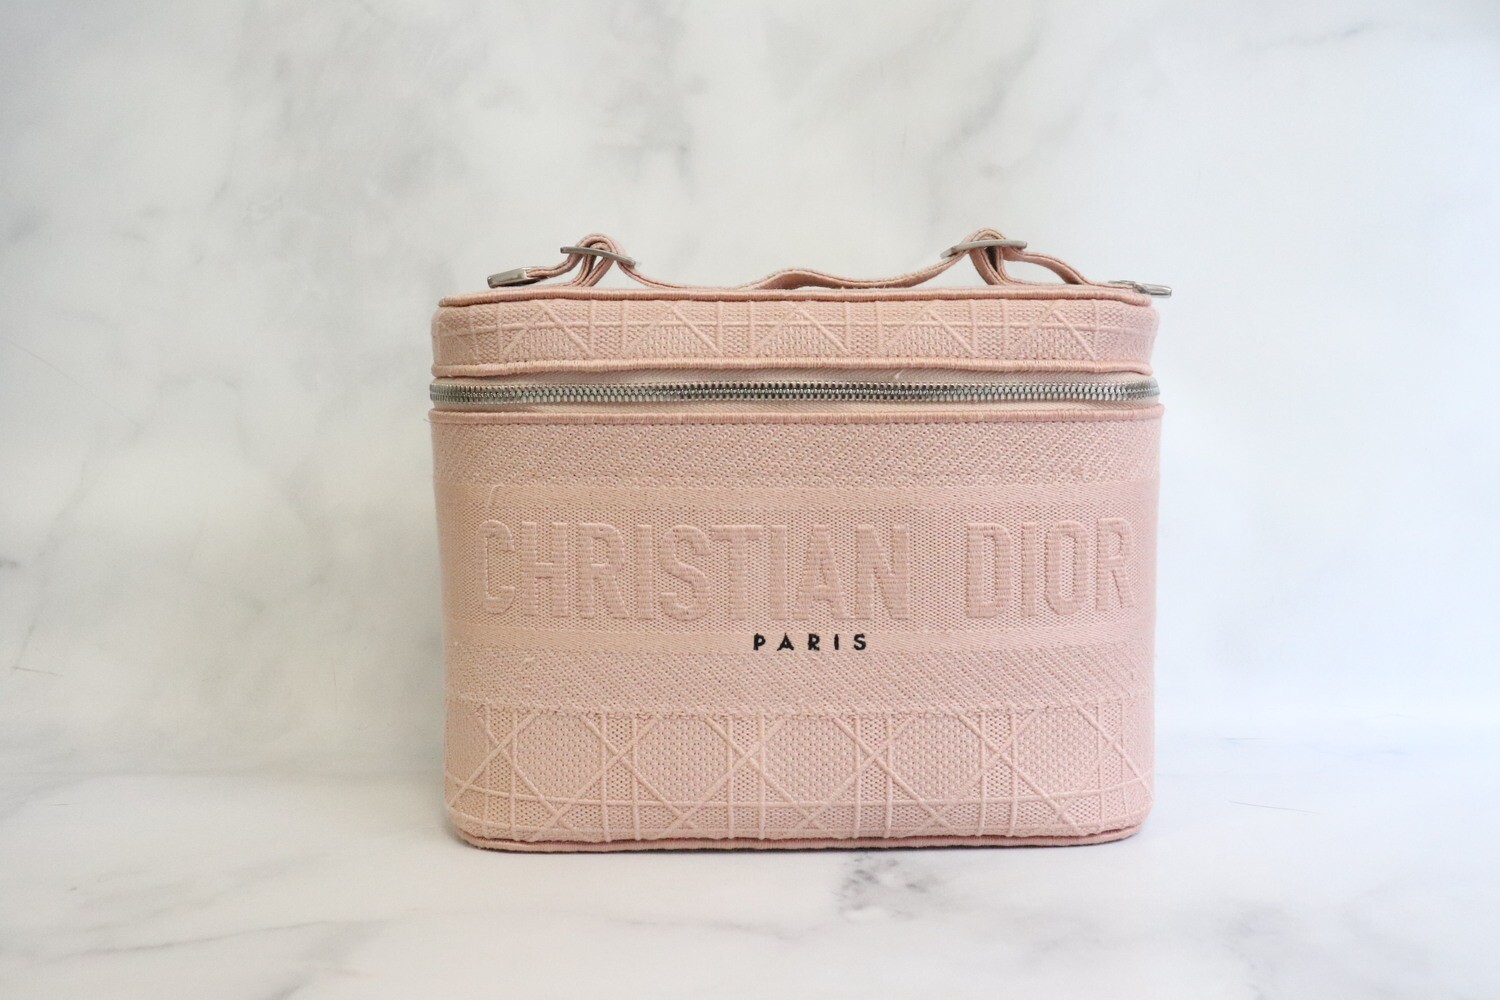 Dior Vanity Travel Case Pink, Preowned - No Dustbag MA001